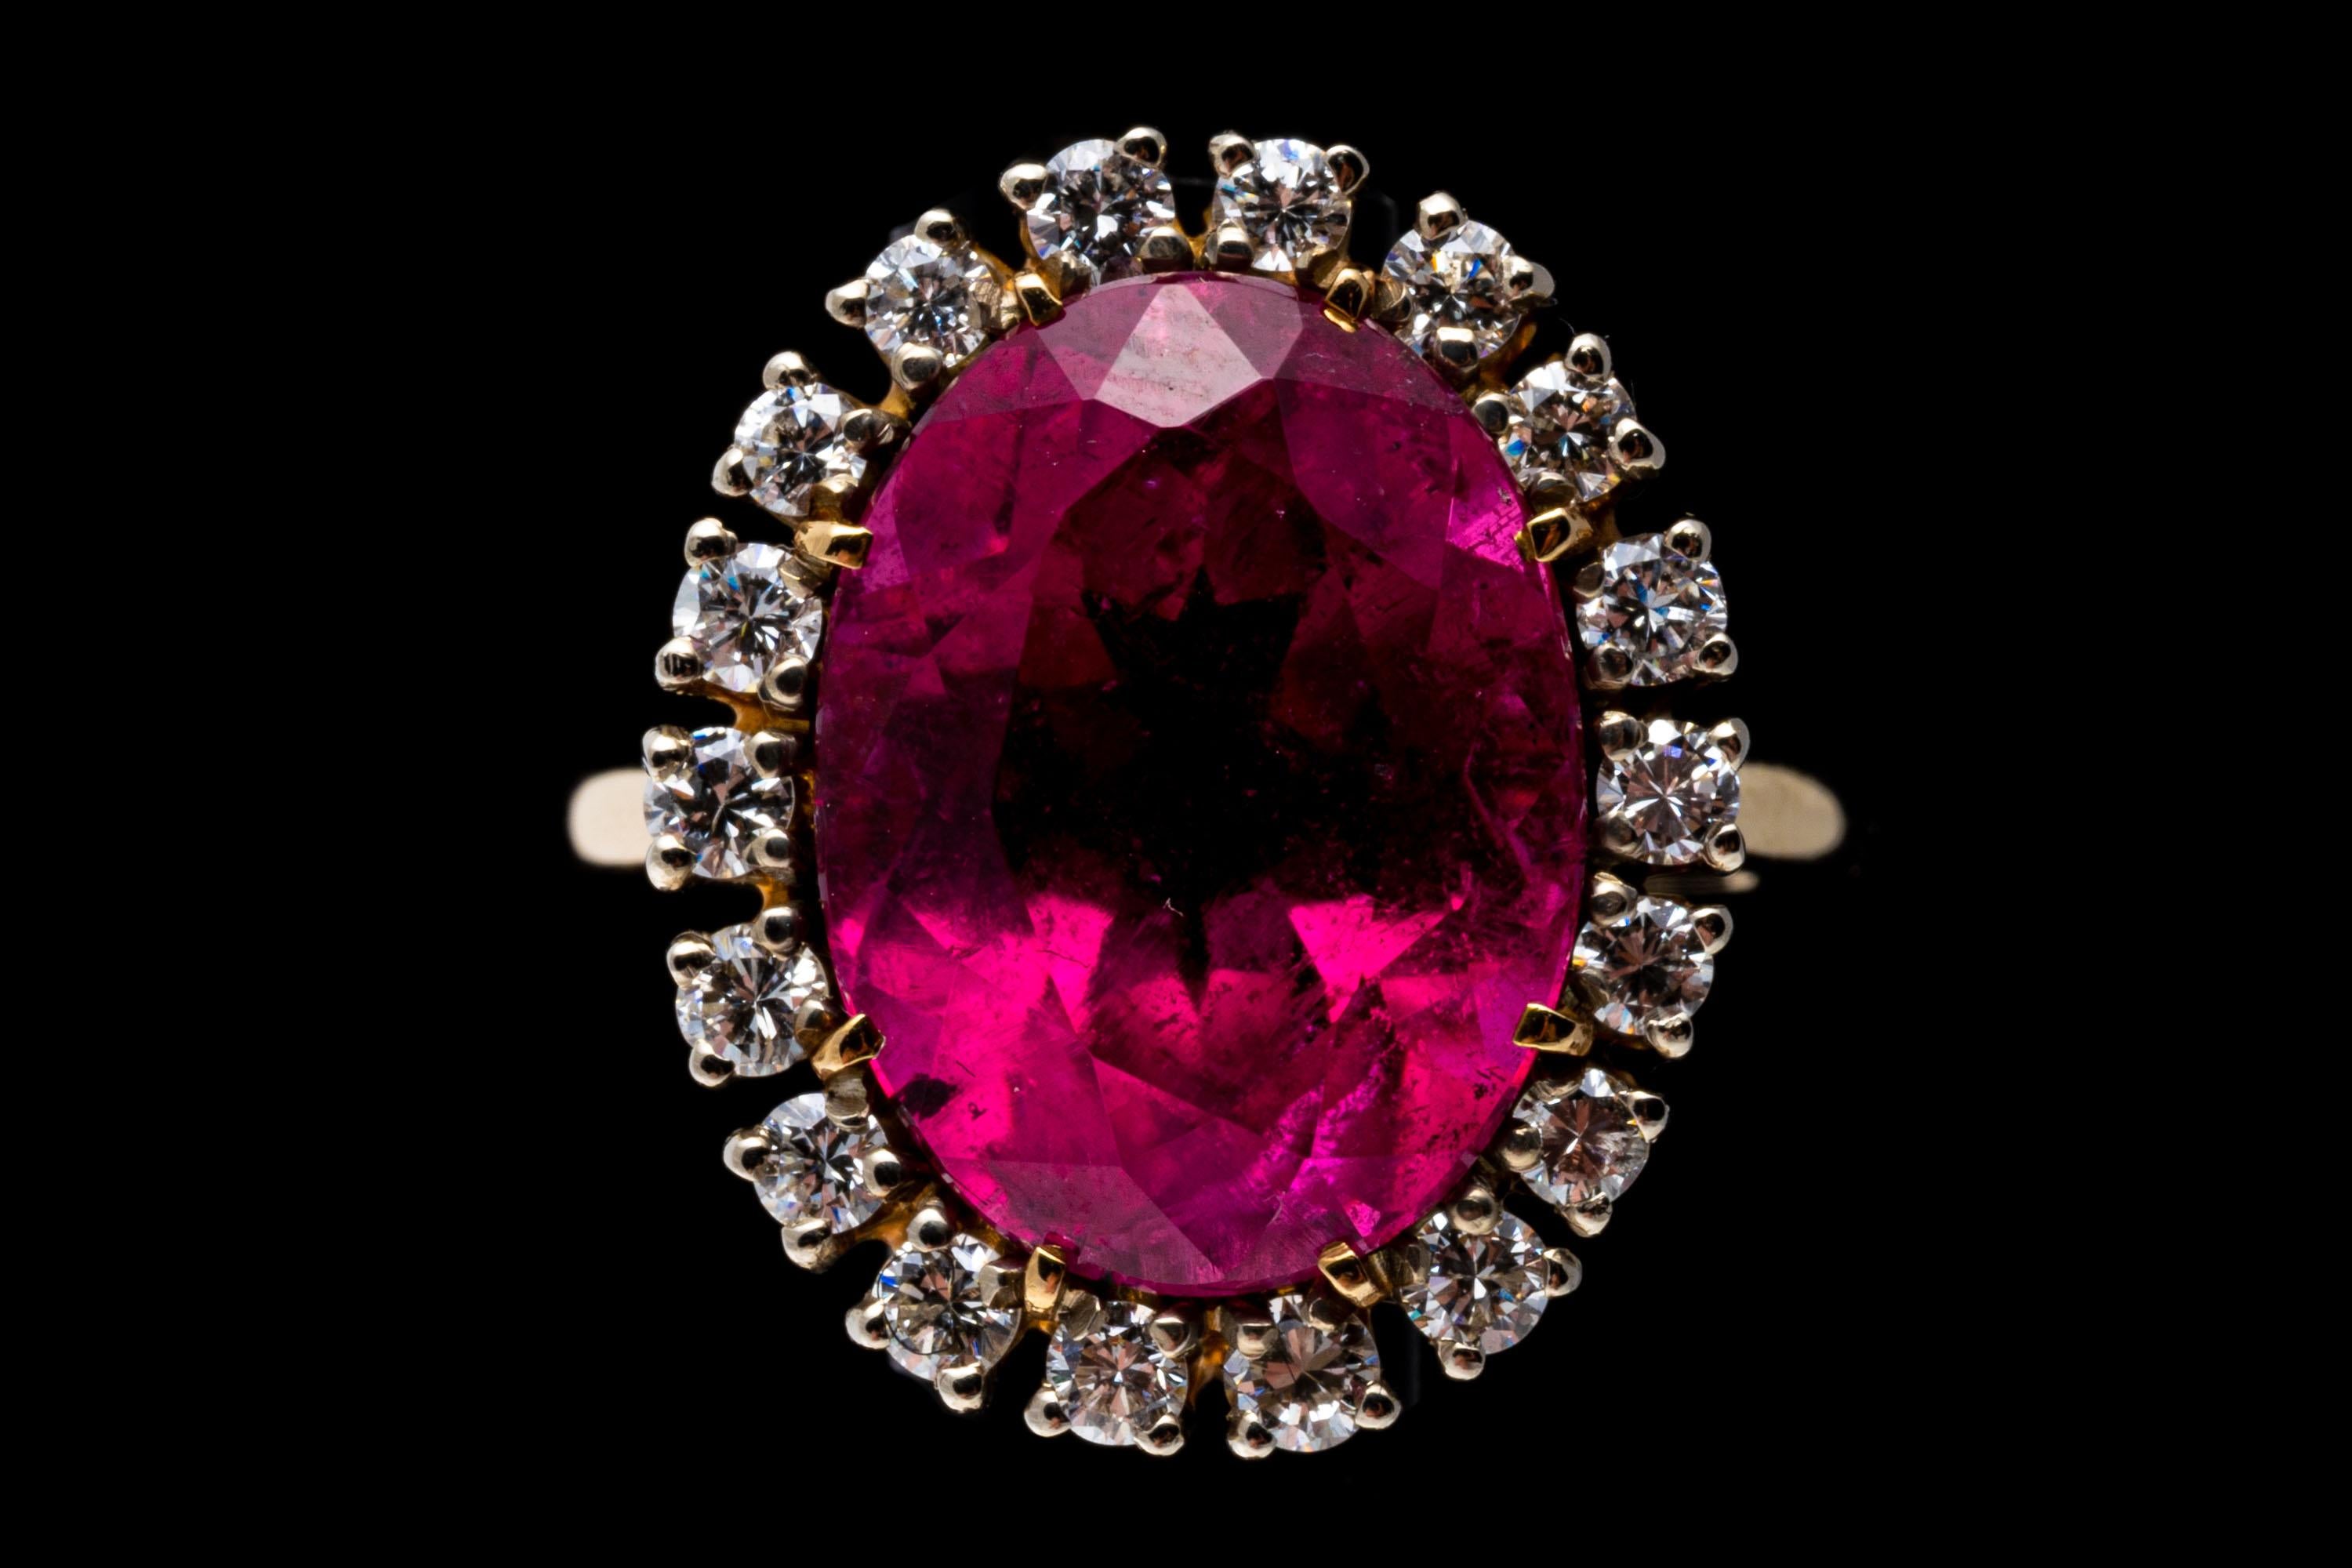 14k Gold Large Pink Tourmaline (App. 6.62 CTS) and Diamond Halo Ring For Sale 1